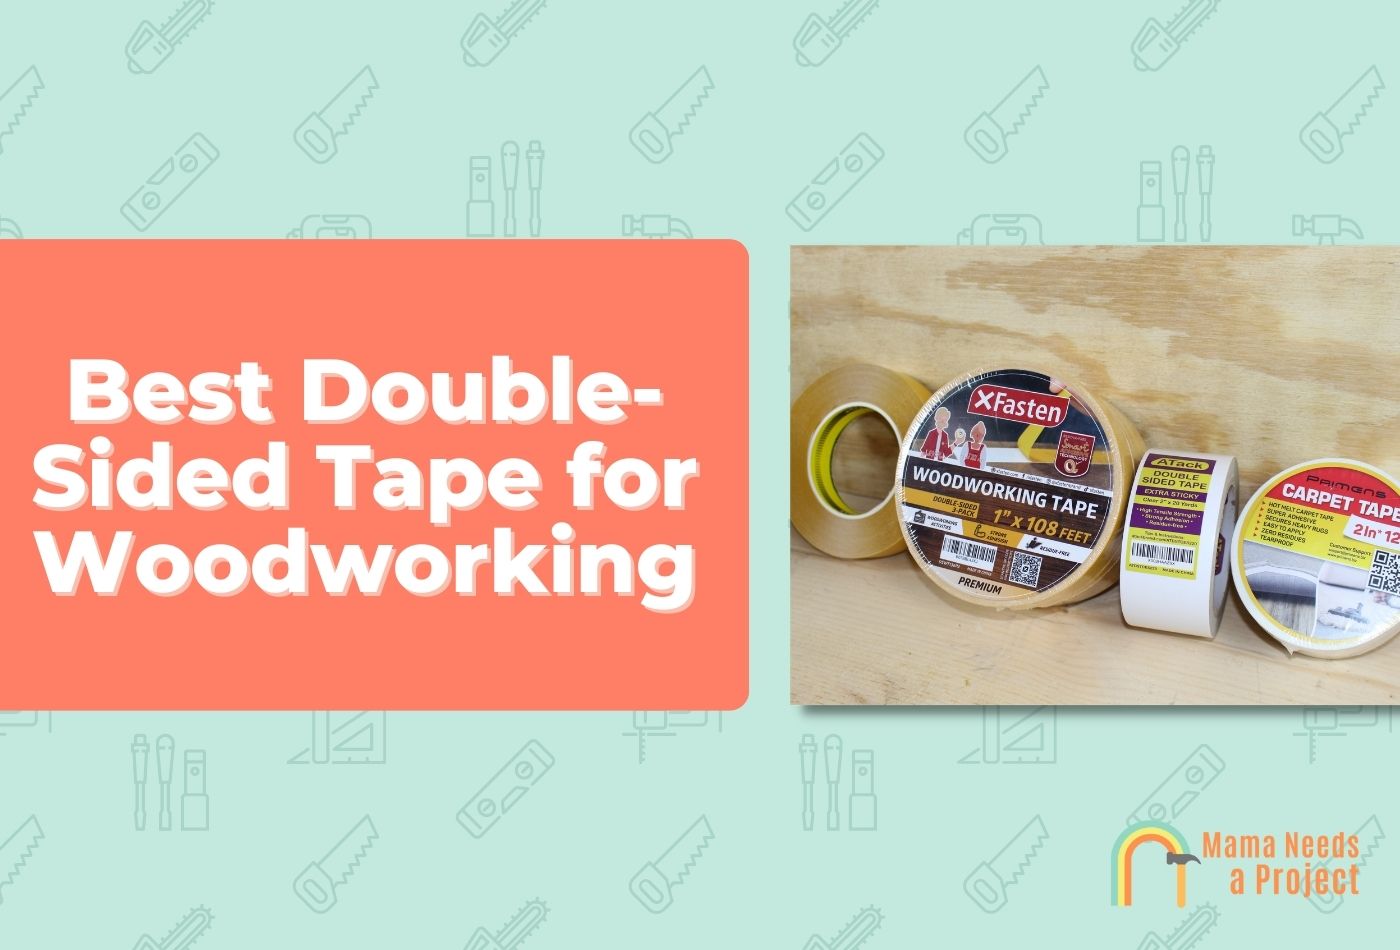 Best Double-Sided Tape for Woodworking